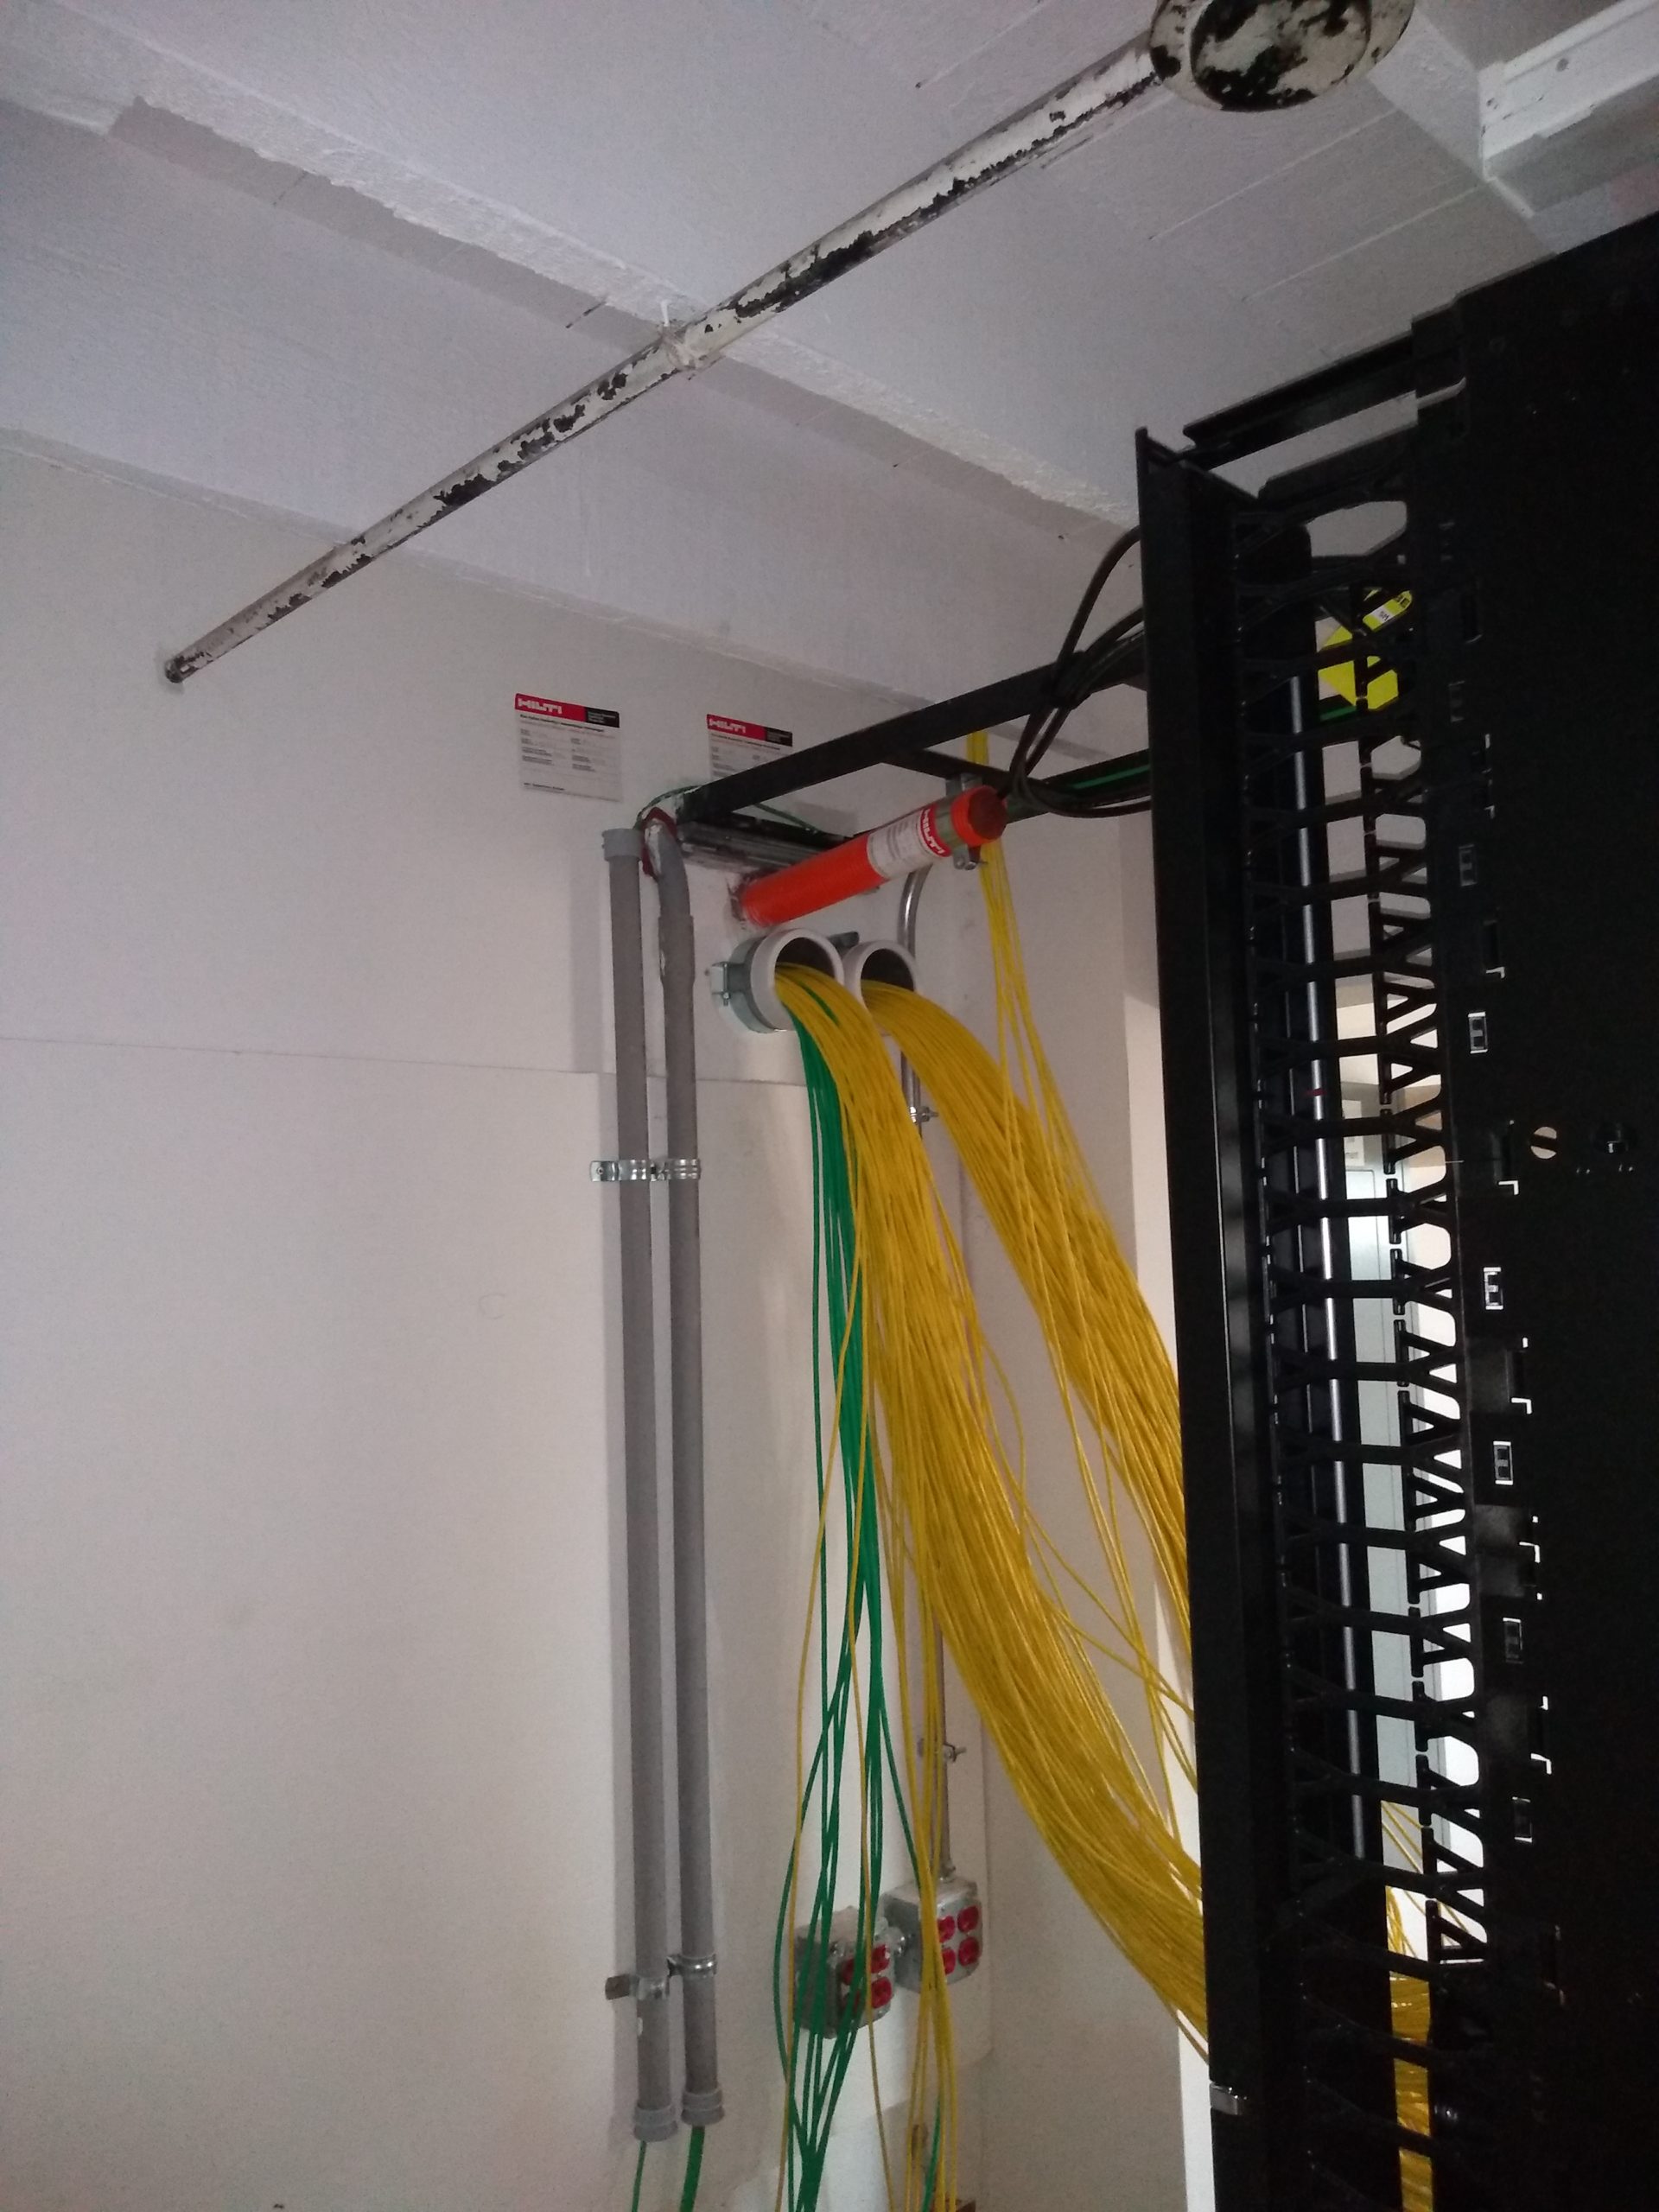 structured cabling set up in building